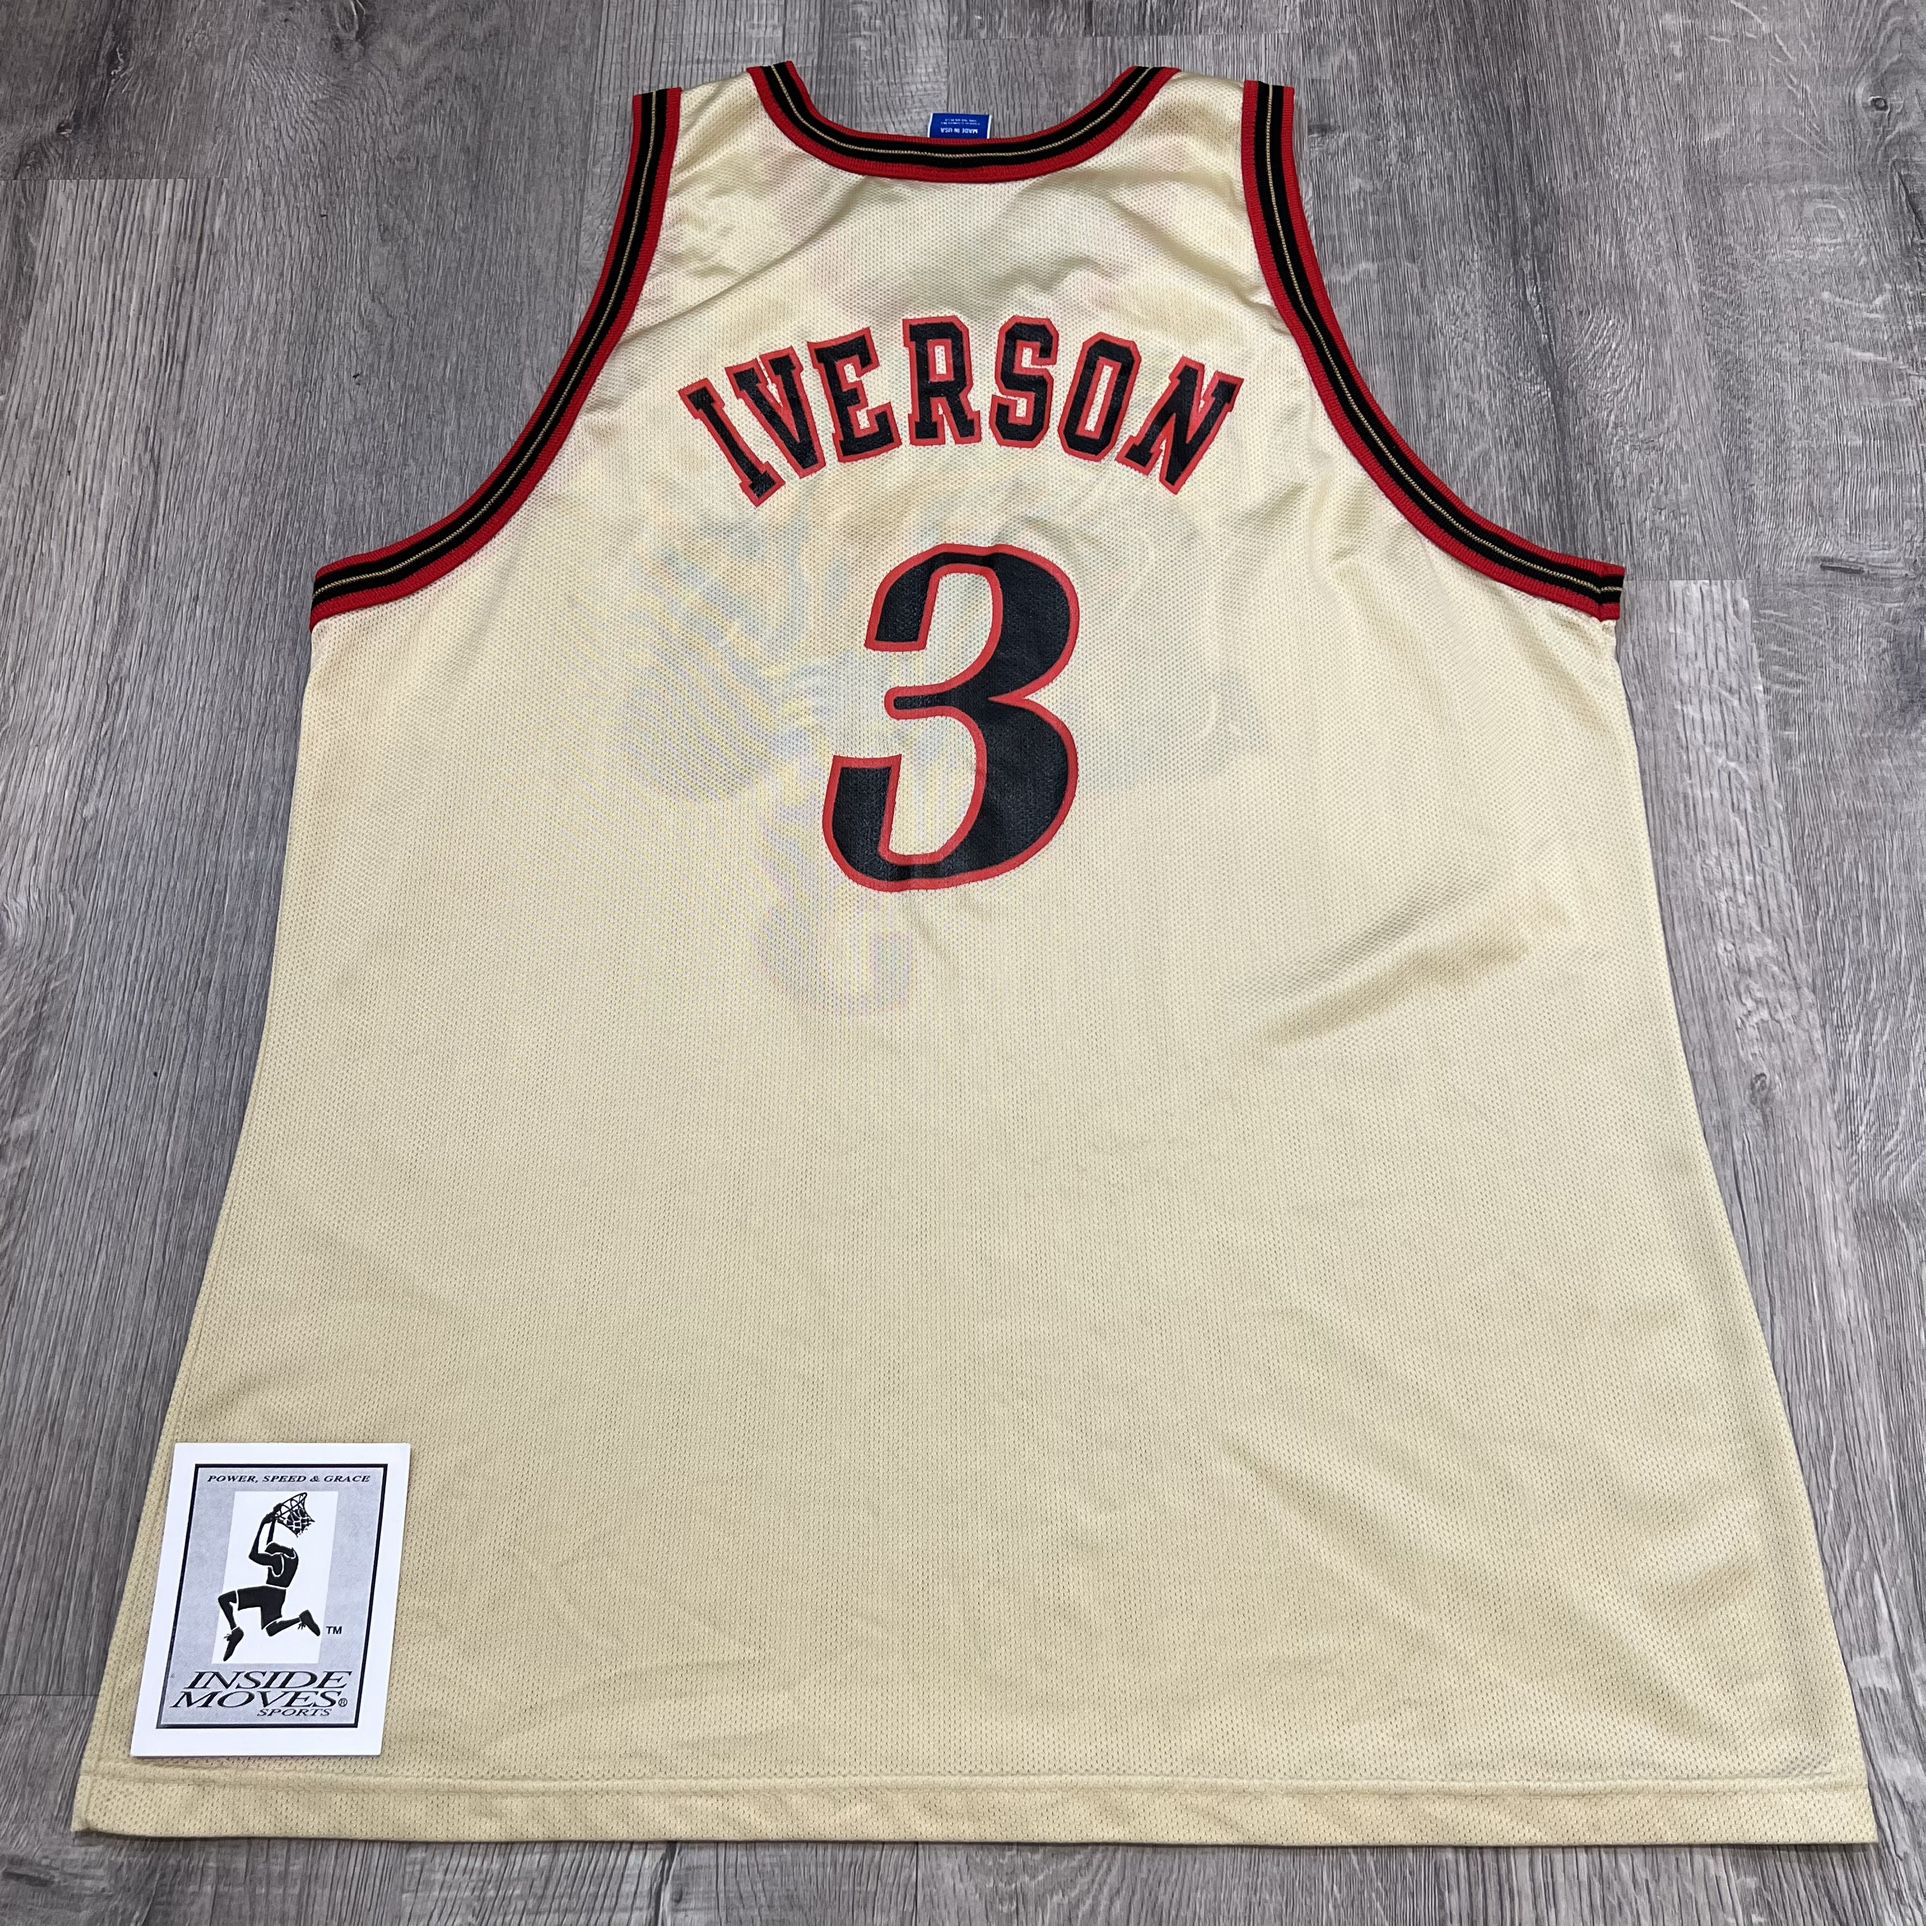 Allen Iverson 76ers NBA Jersey for Sale in Lakewood, CA - OfferUp